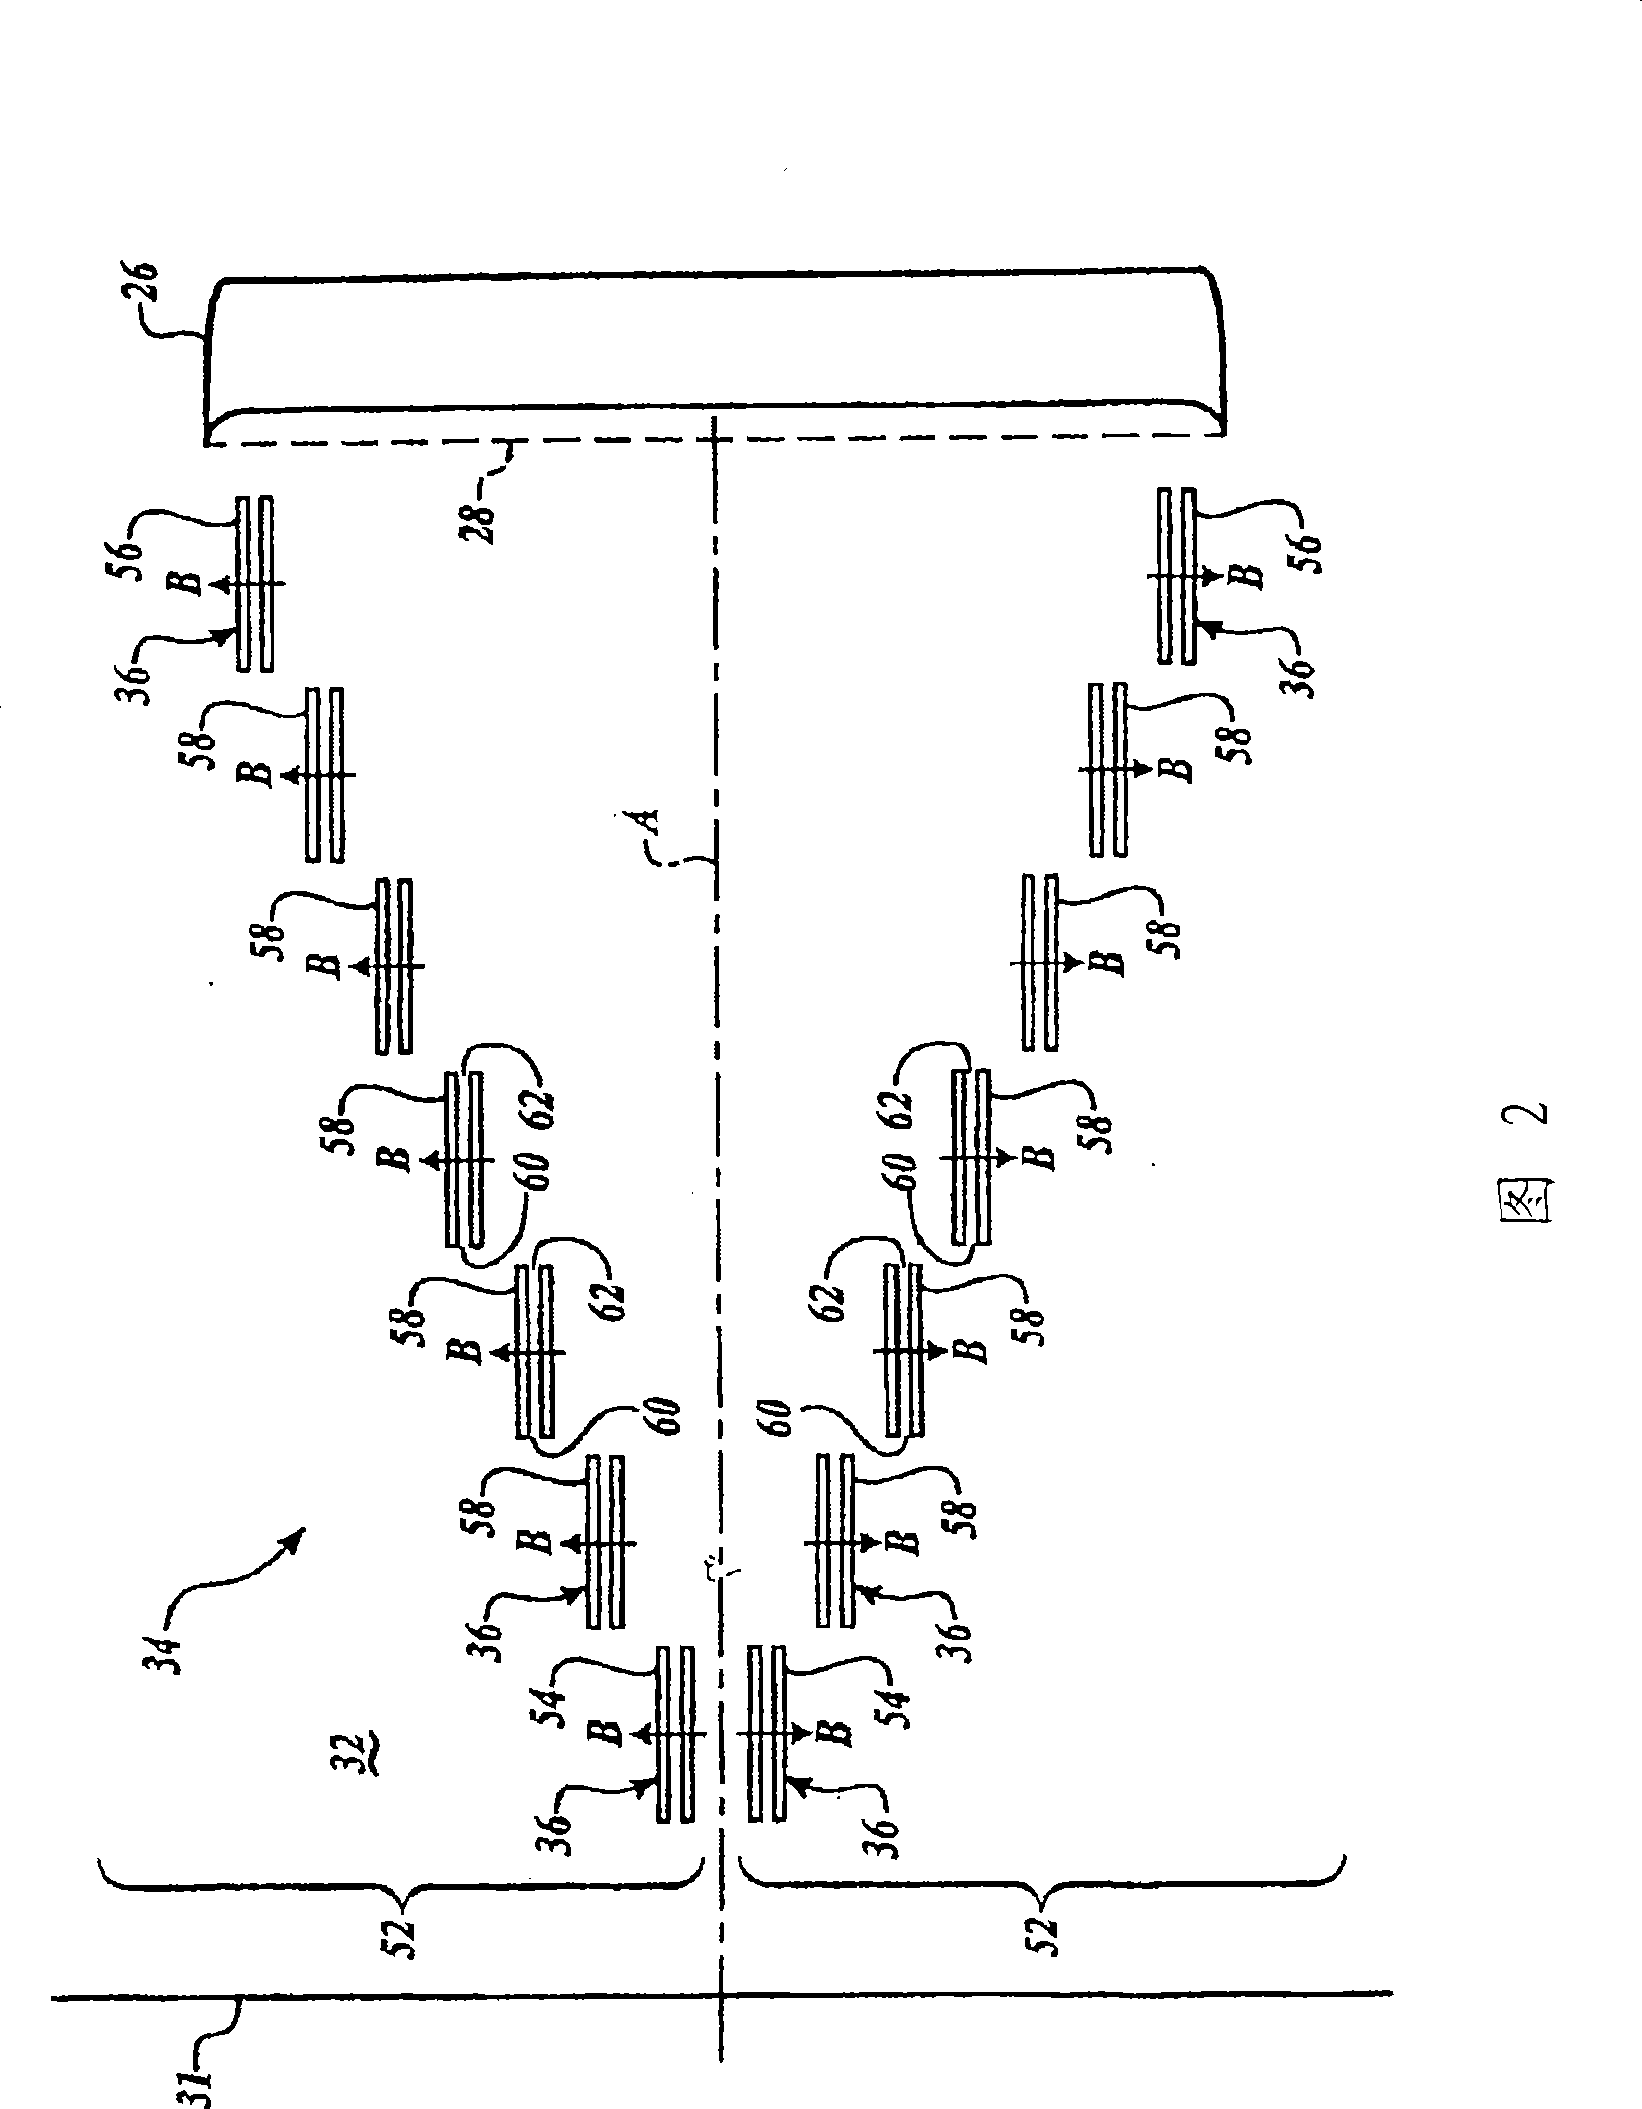 Inlet distortion and recovery control system